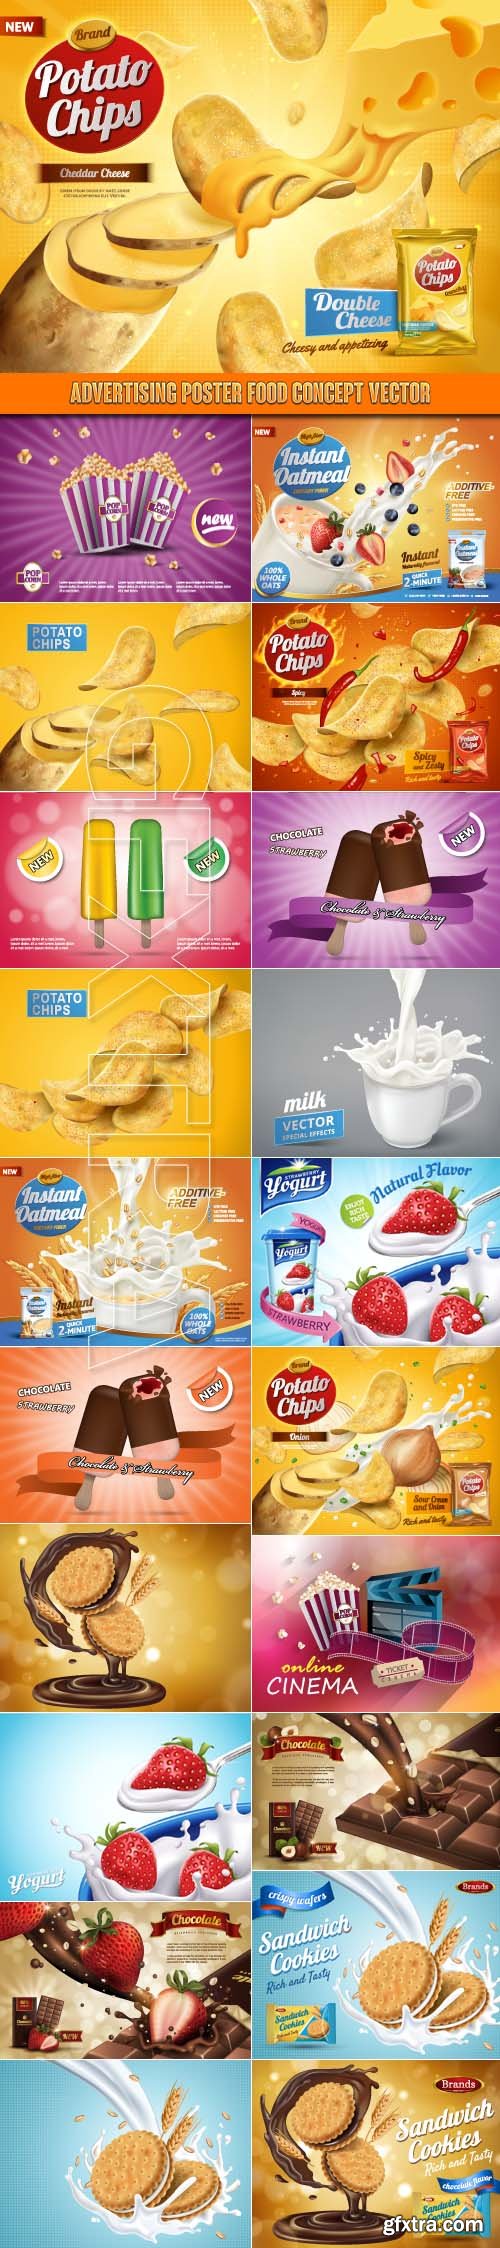 Advertising Poster Food Concept vector